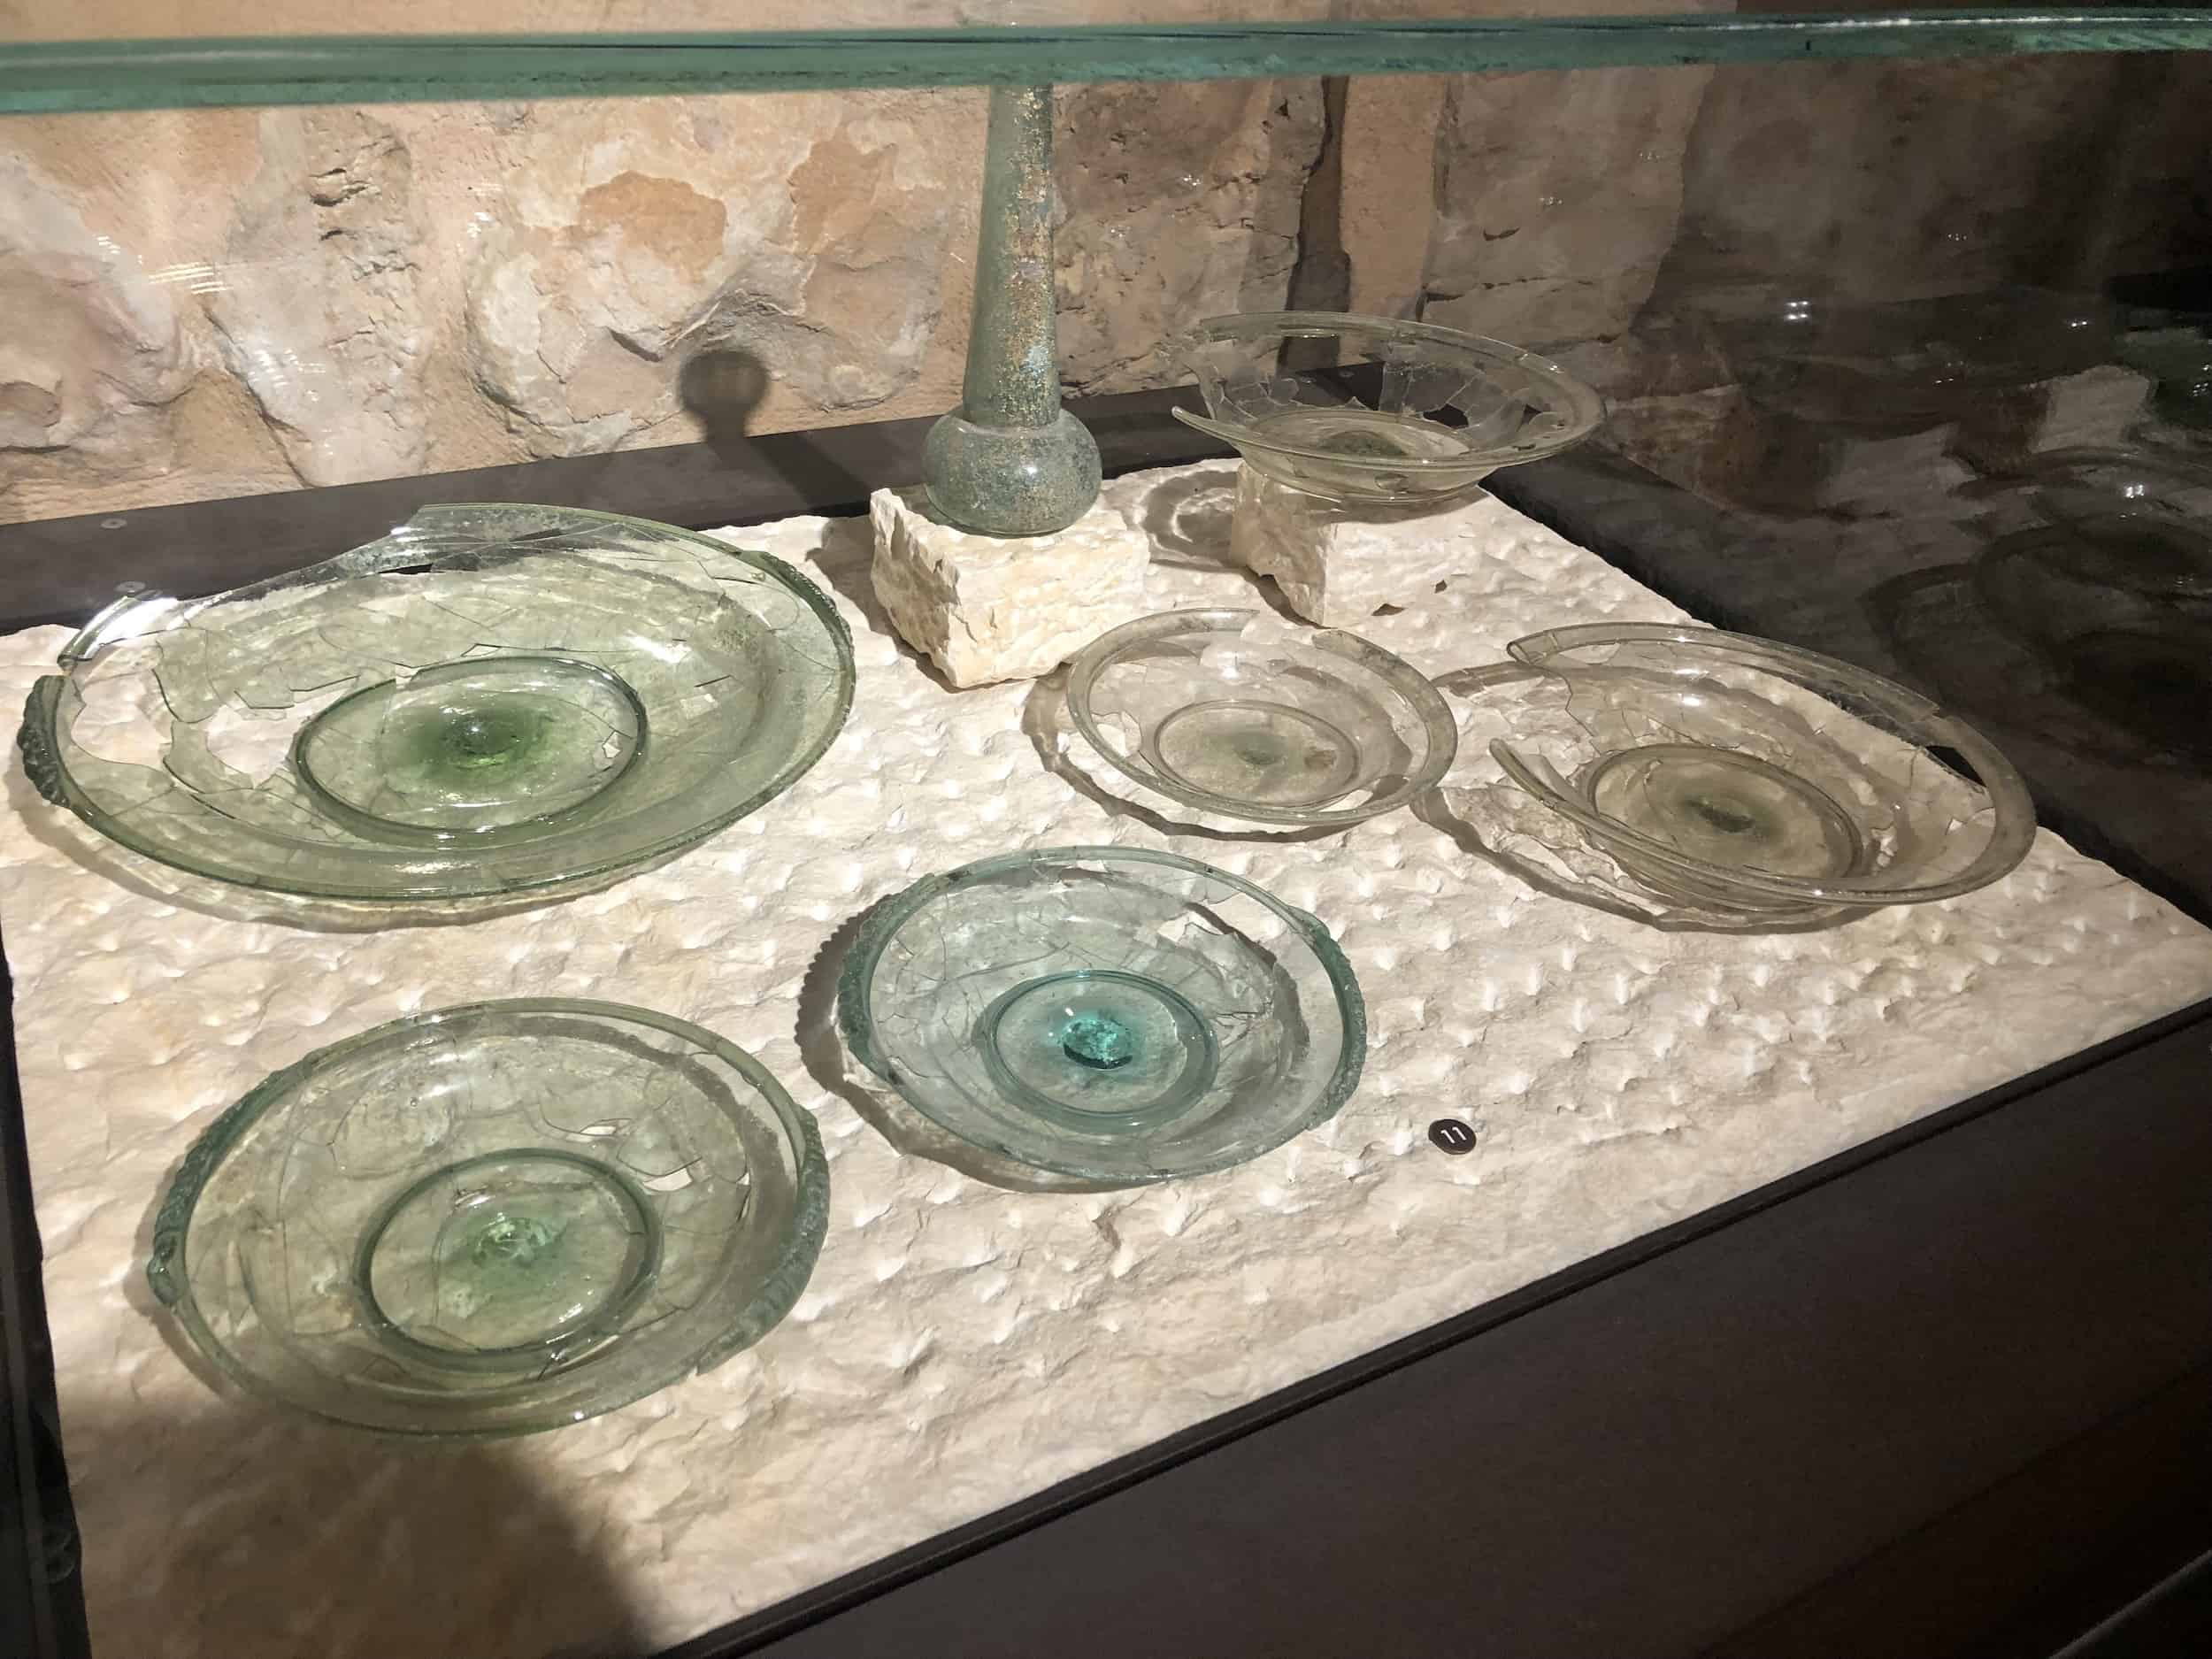 Glassware from Capernaum at the Terra Sancta Museum in the Muslim Quarter of the Old City of Jerusalem